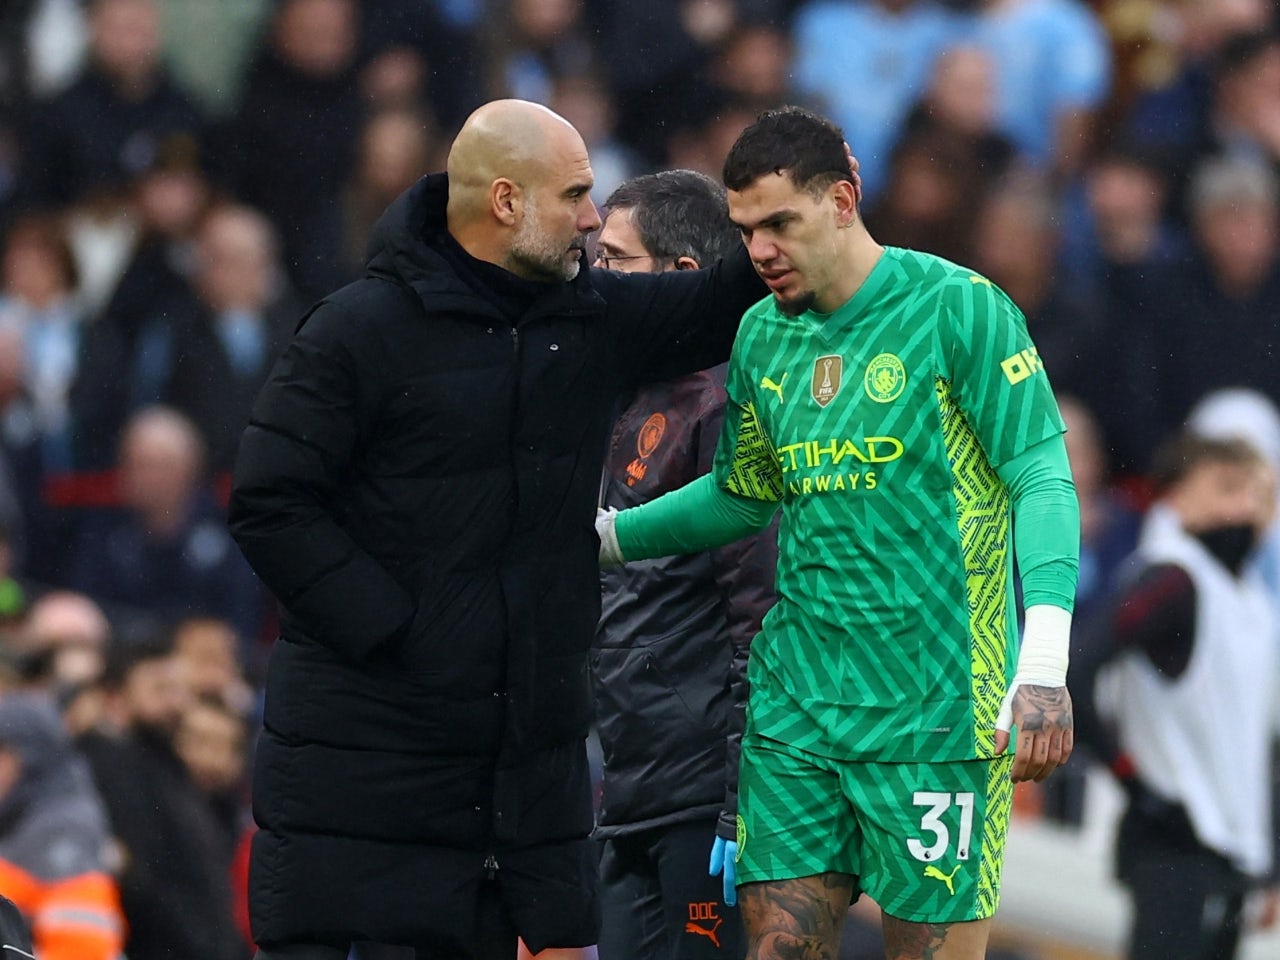 Pep Guardiola issues concerning Ederson injury update after Liverpool draw